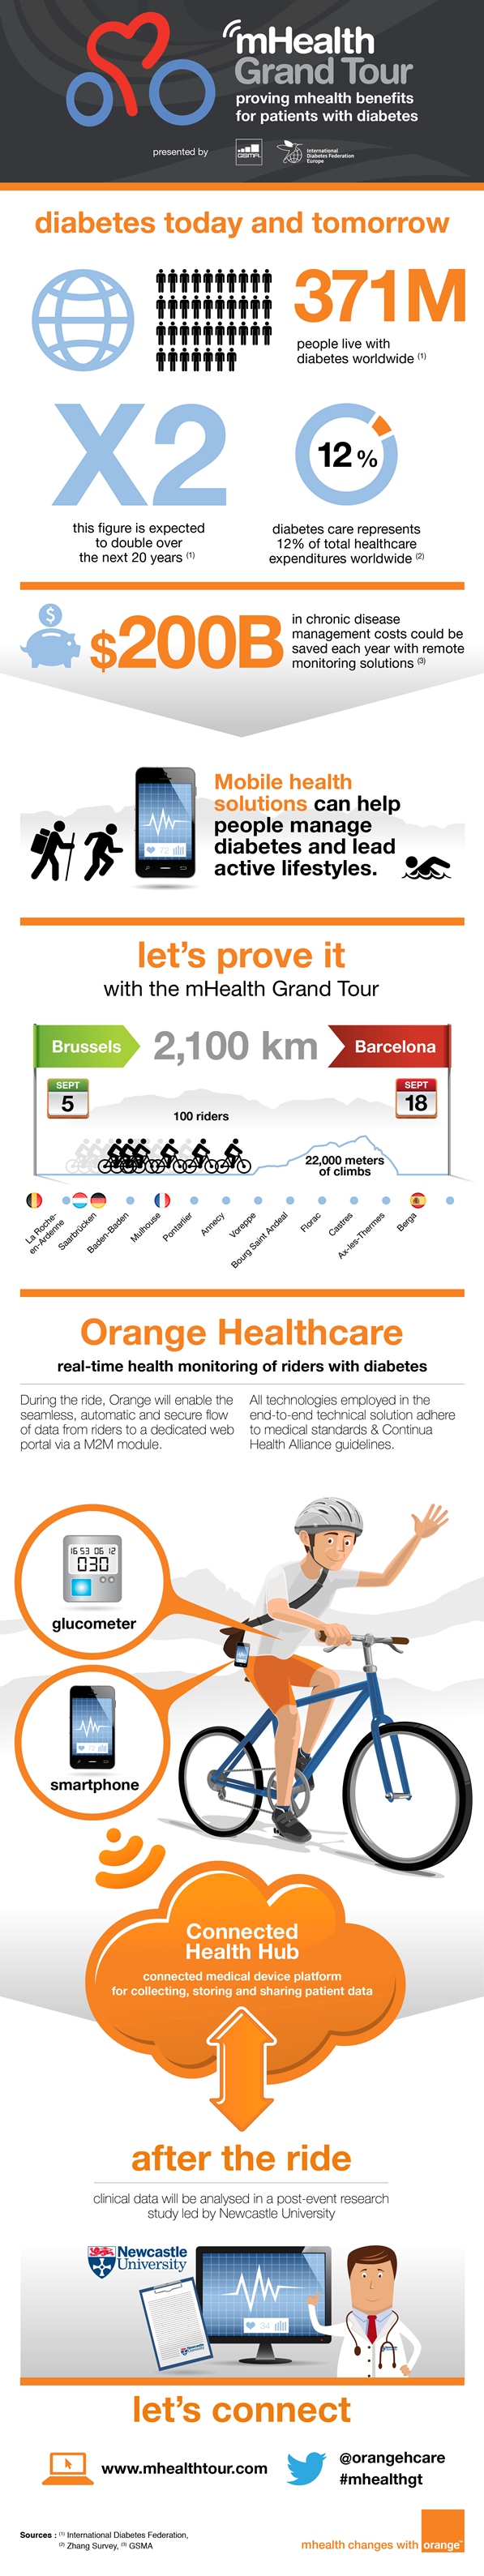 mHealth Grand tour Infographic